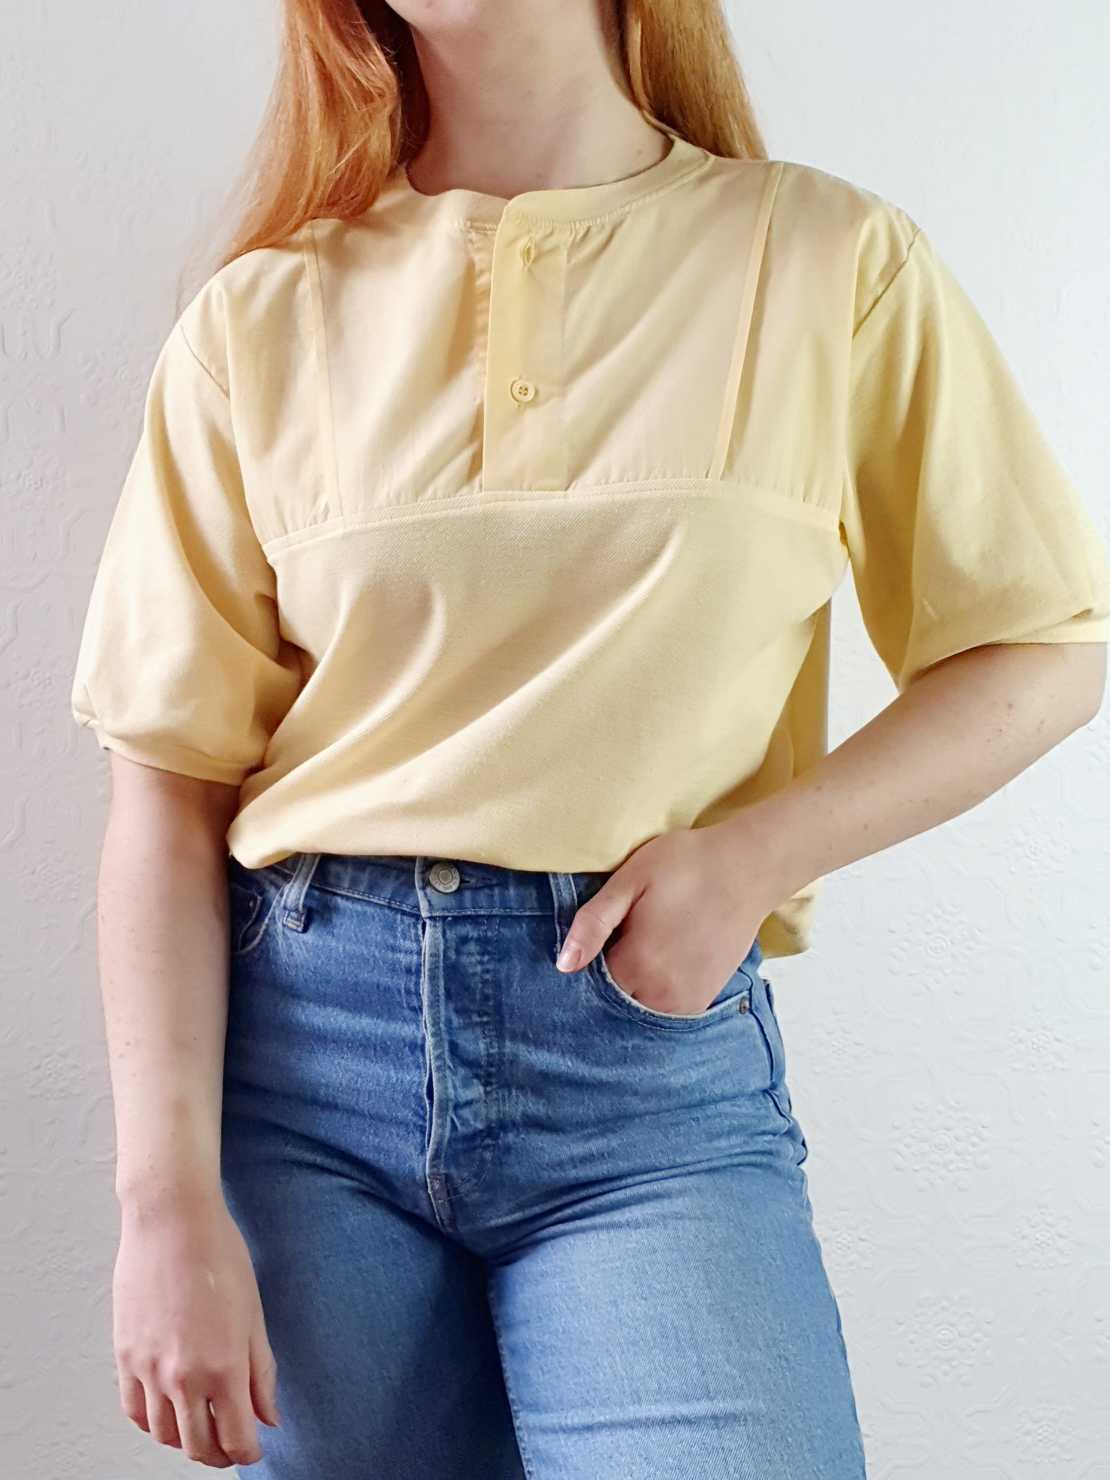 Vintage Yellow Short Sleeve Top - S/M